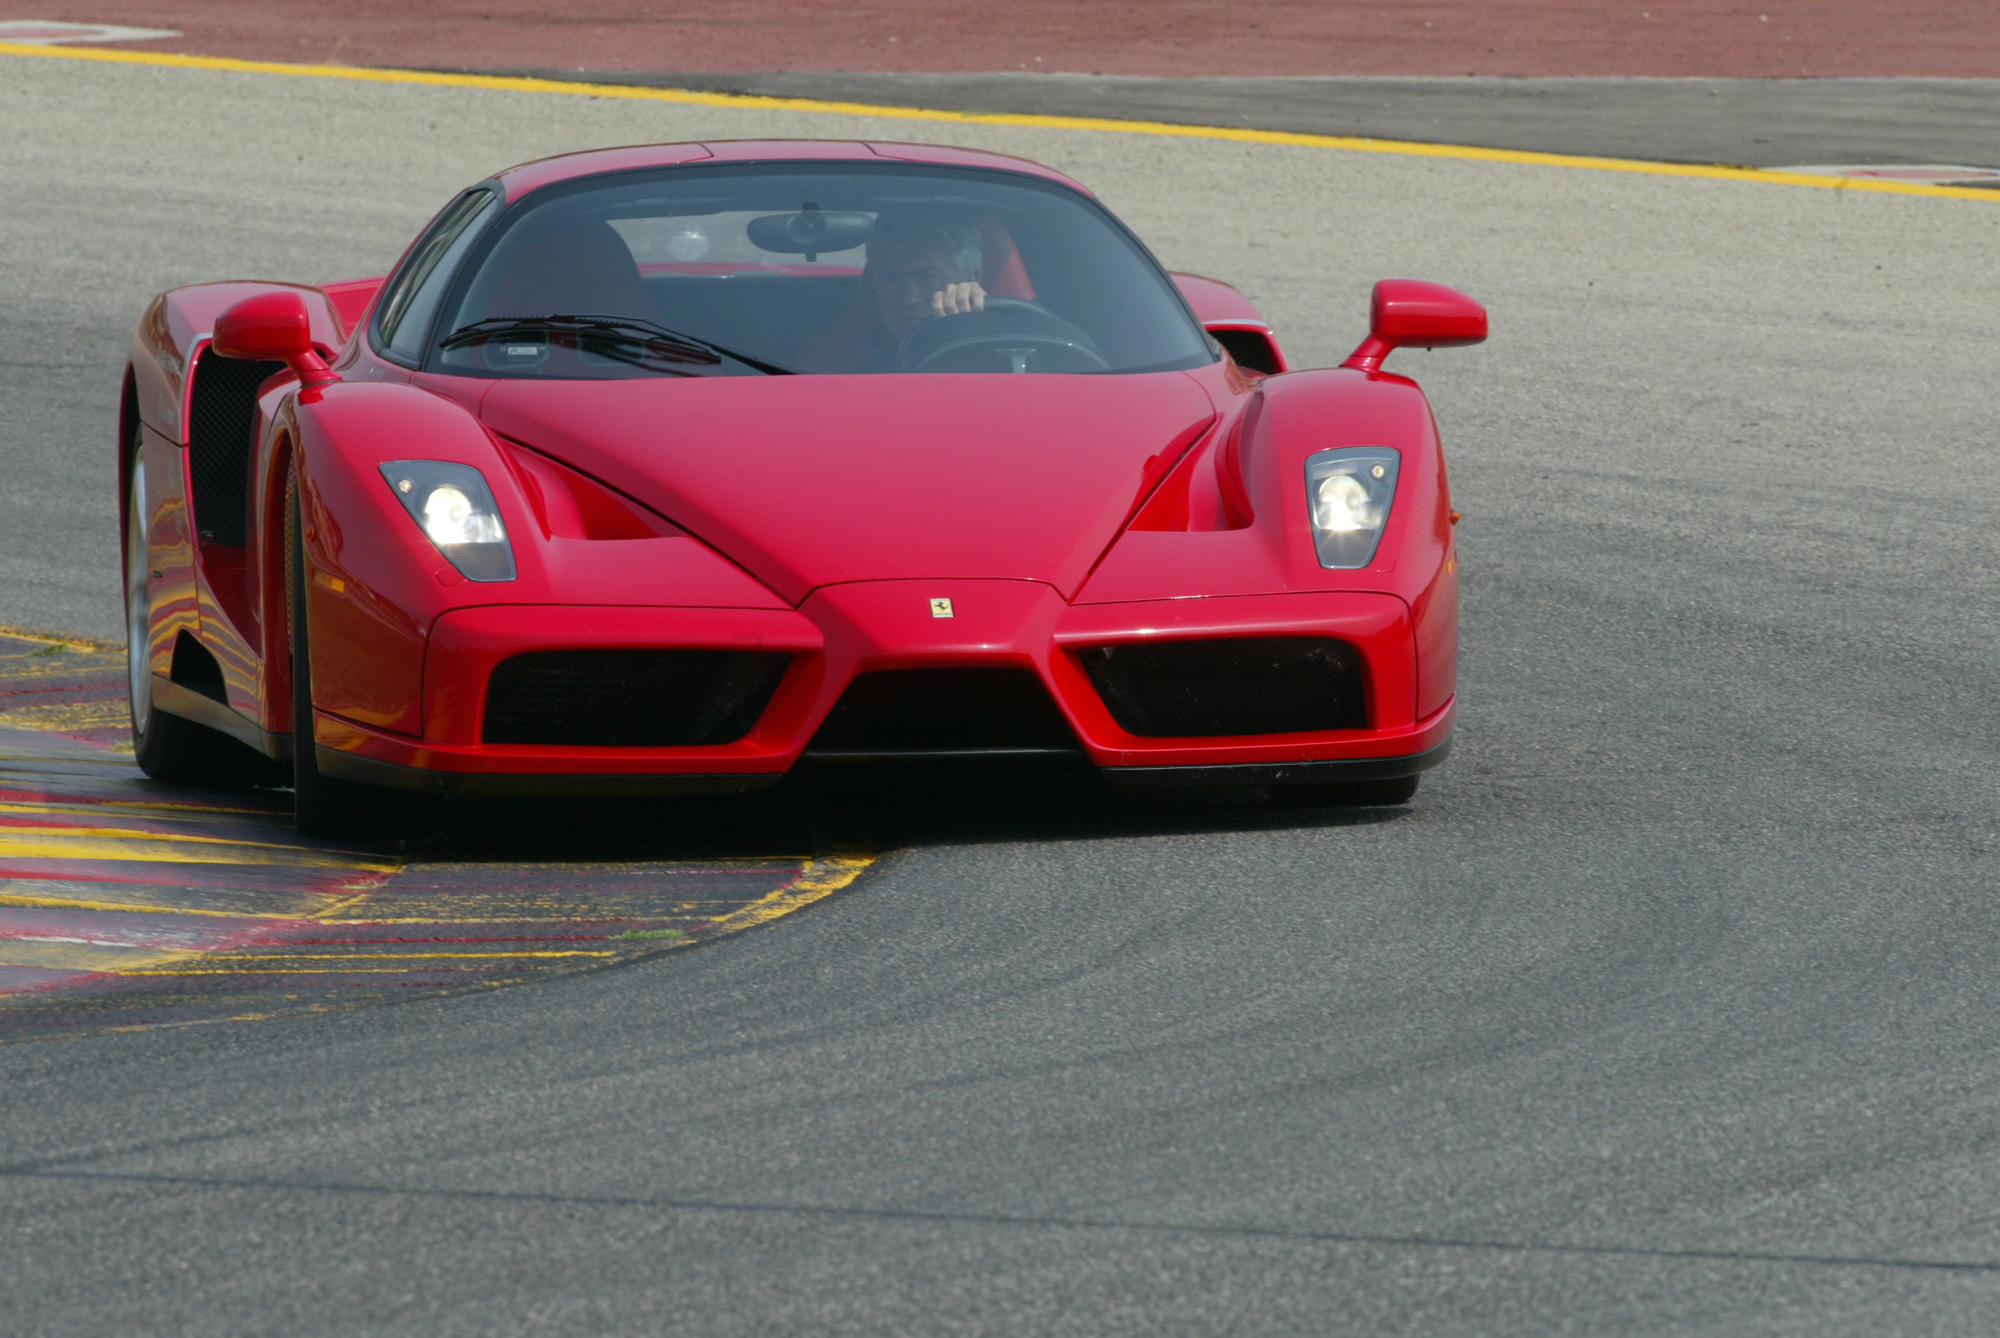 The Enzo was named after Ferrari's founder